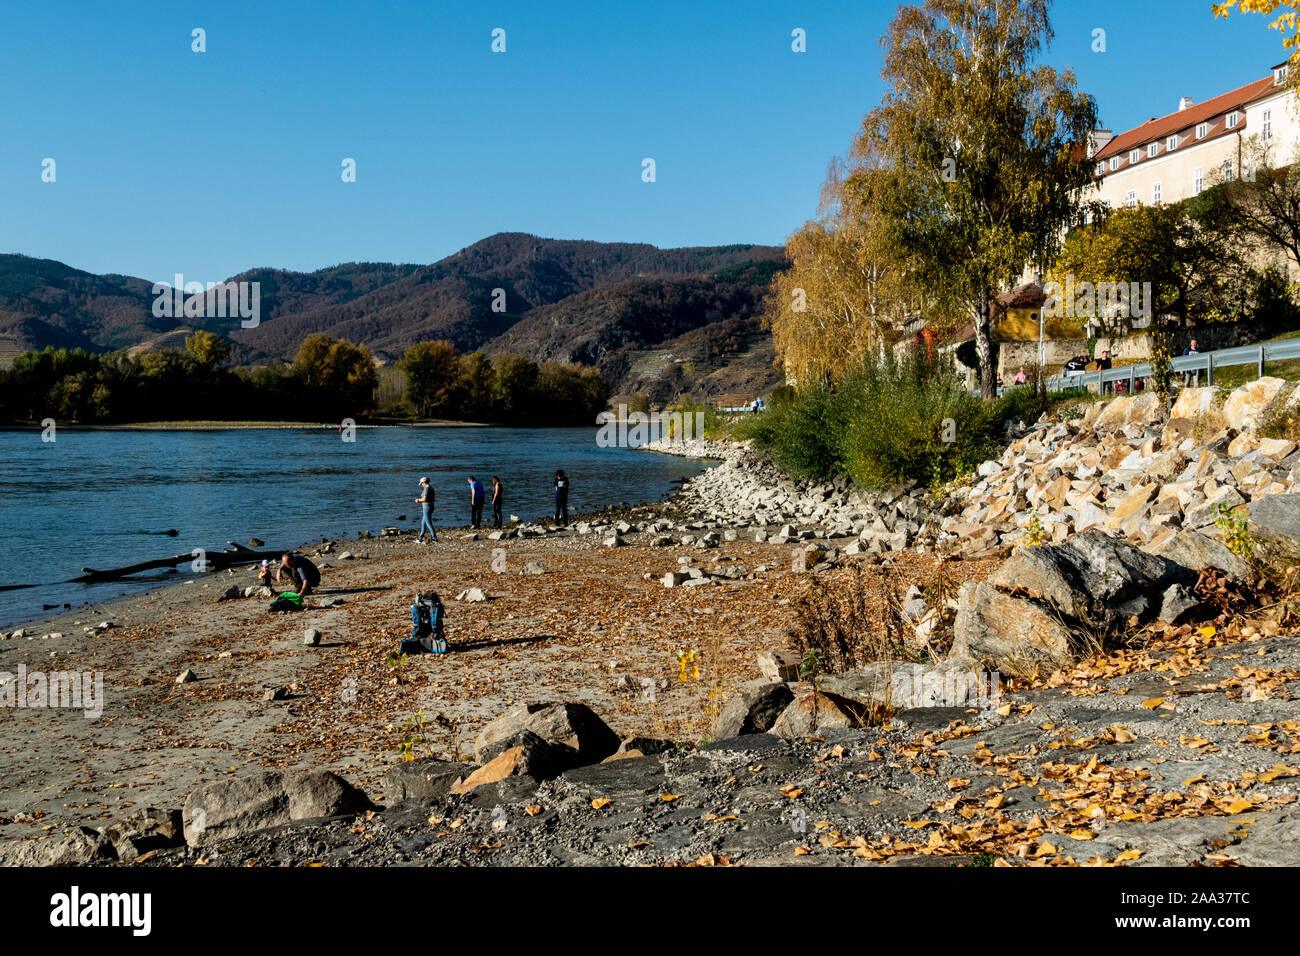 People on the riverside enjoying a breathtaking view over the river Danube at Durnstein, with the mountains in the background Stock Photo